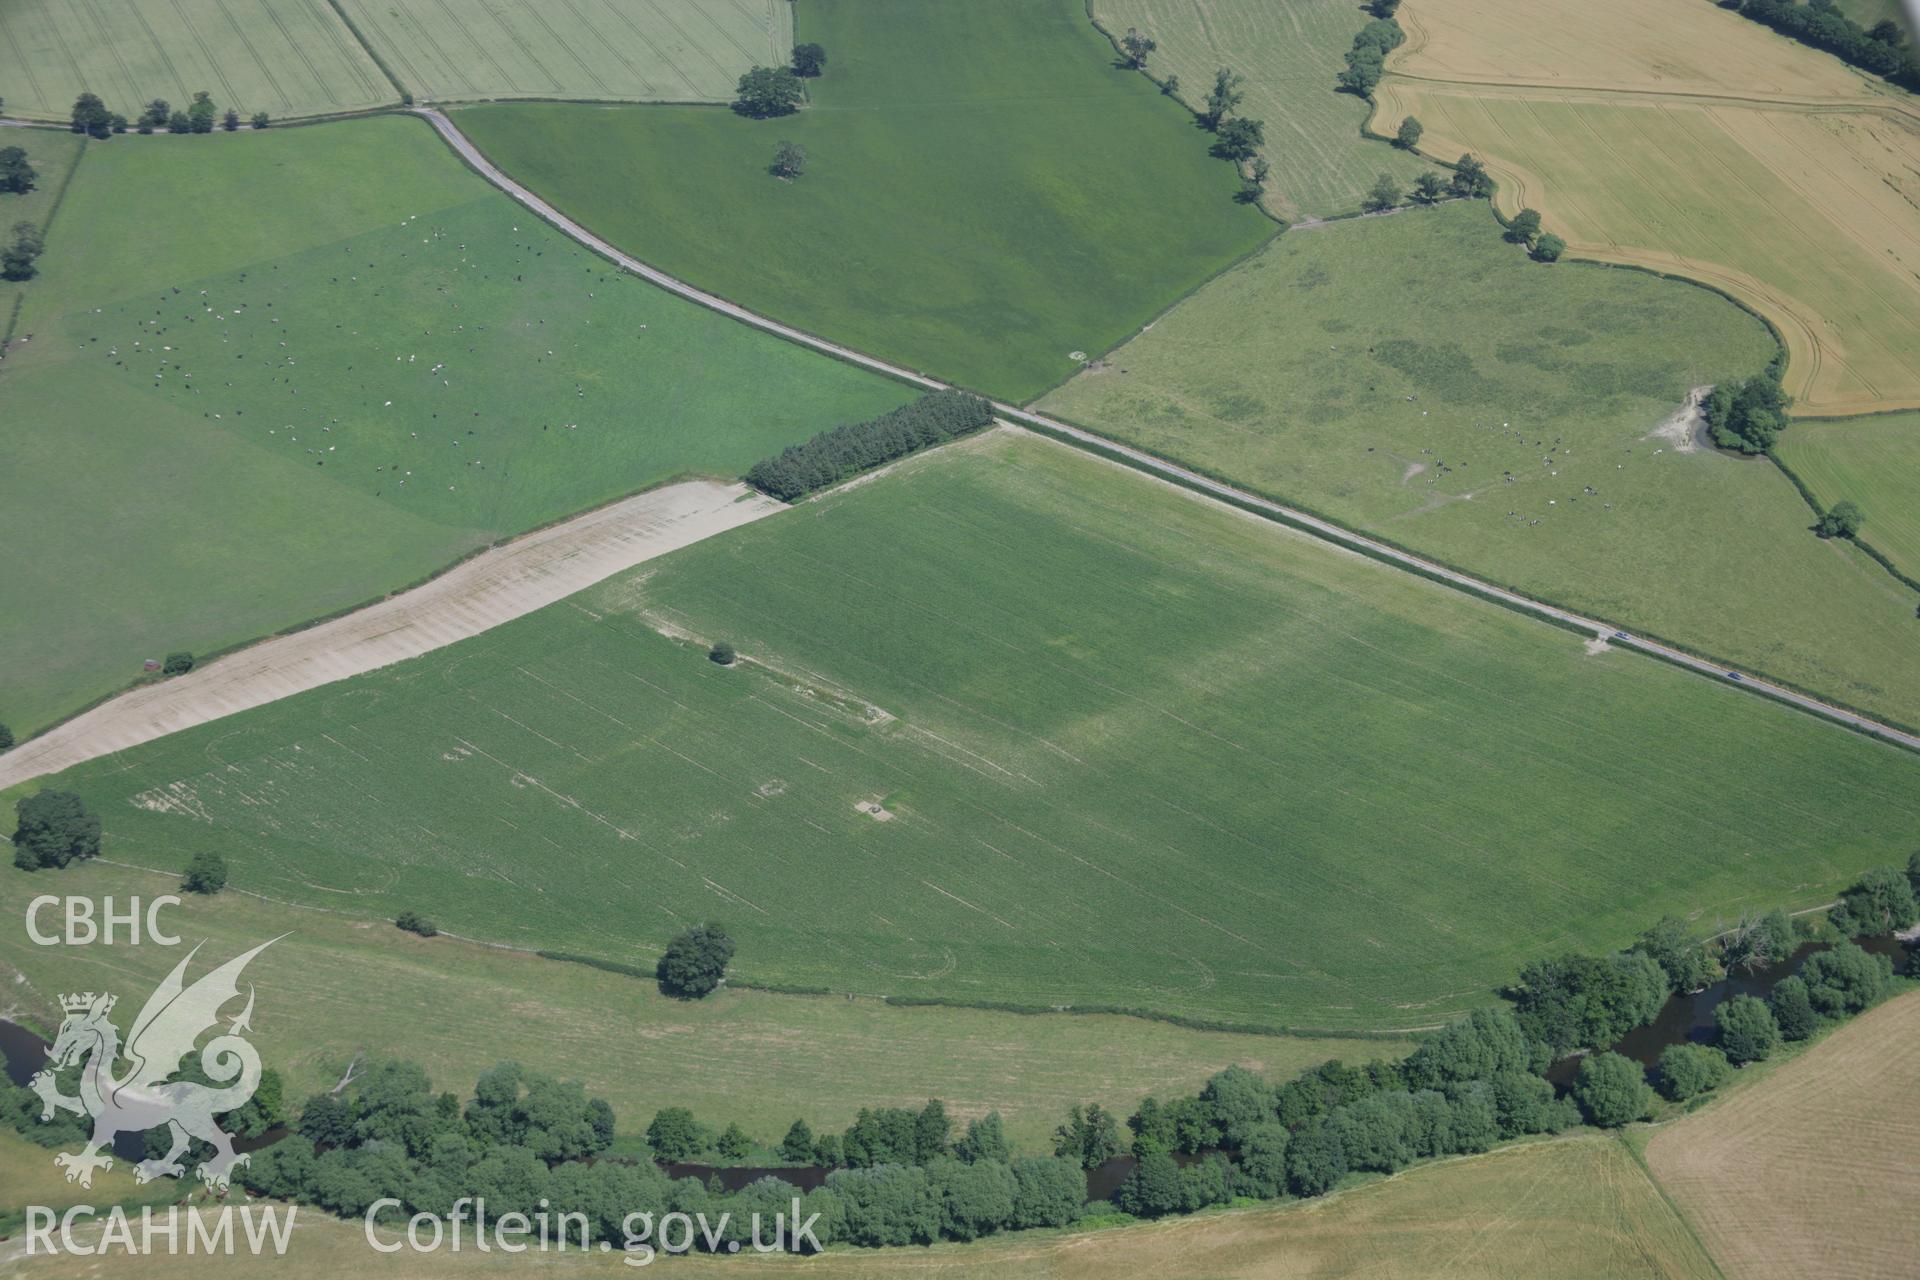 RCAHMW colour oblique aerial photograph of Forden Gaer Roman Settlement. Taken on 13 July 2006 by Toby Driver.